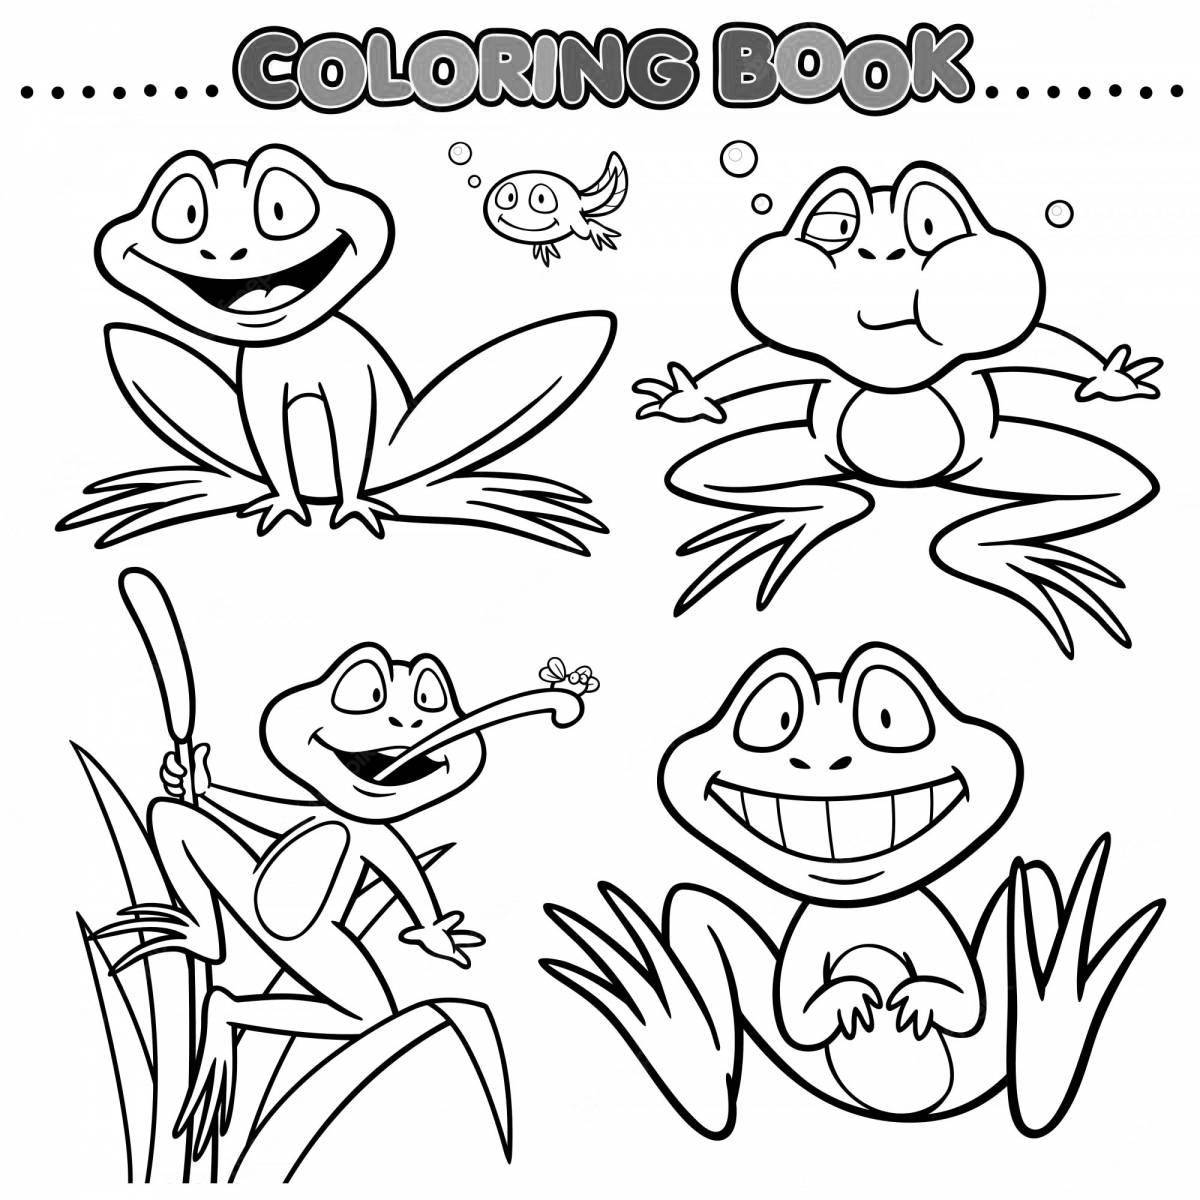 Froggy playful coloring